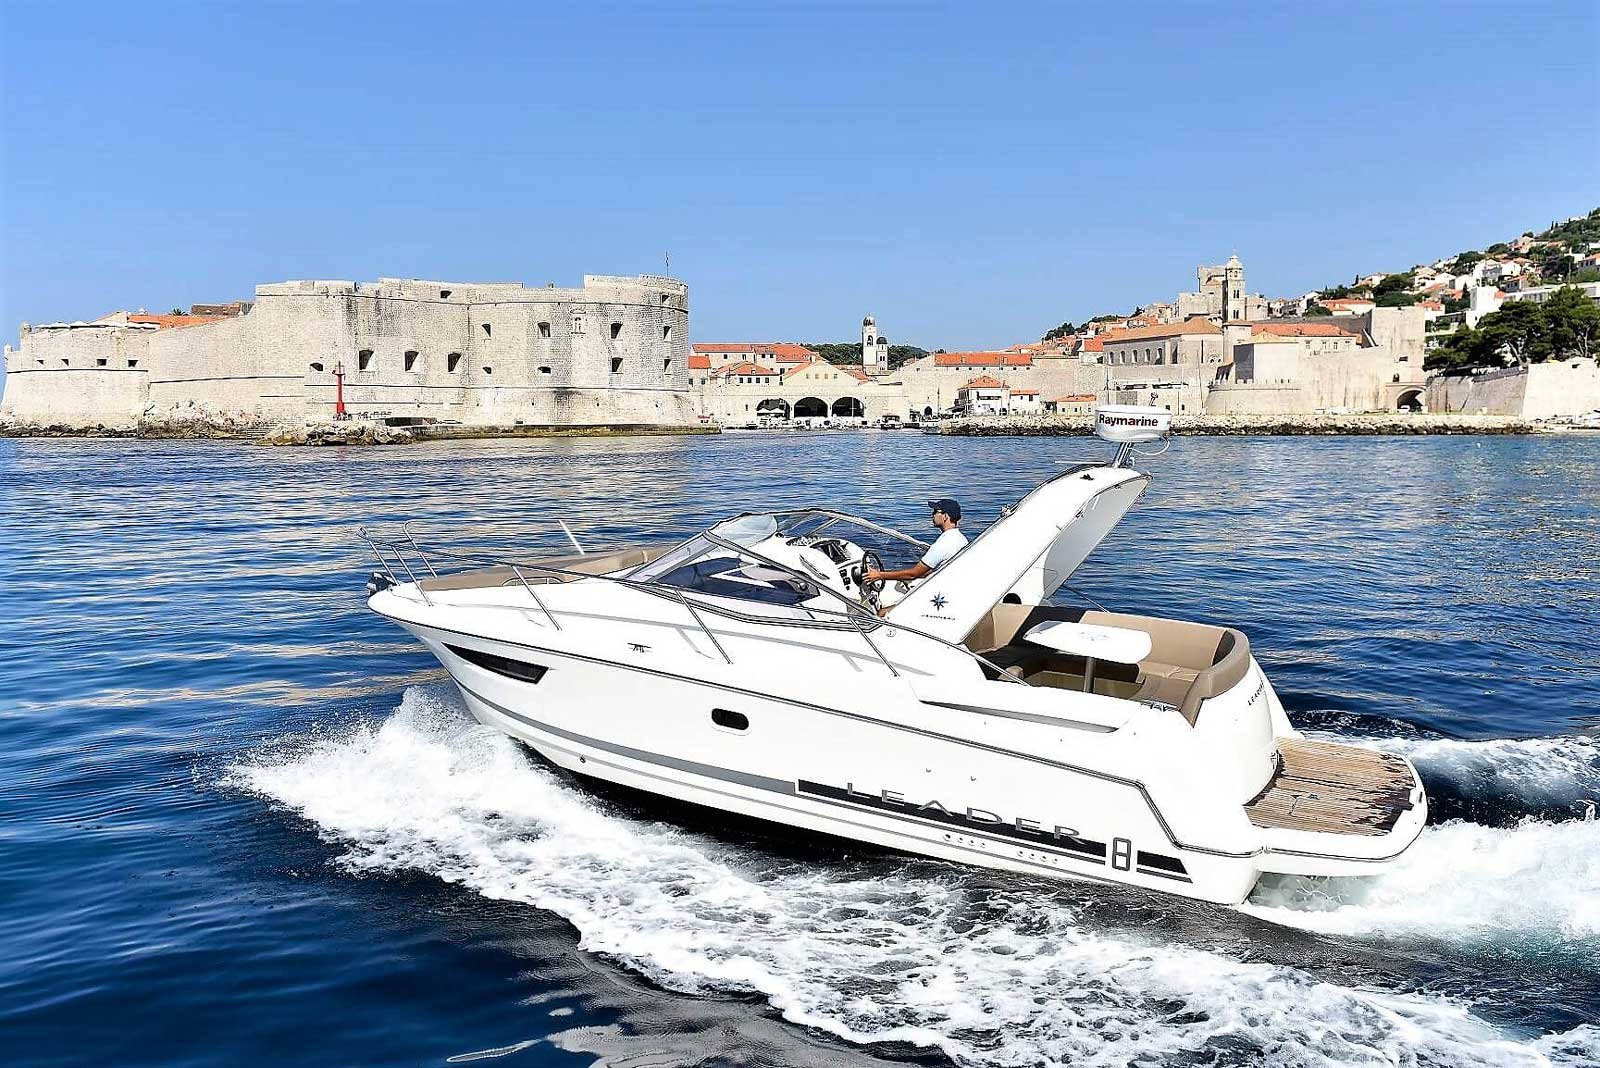 How to try yachting in Dubrovnik